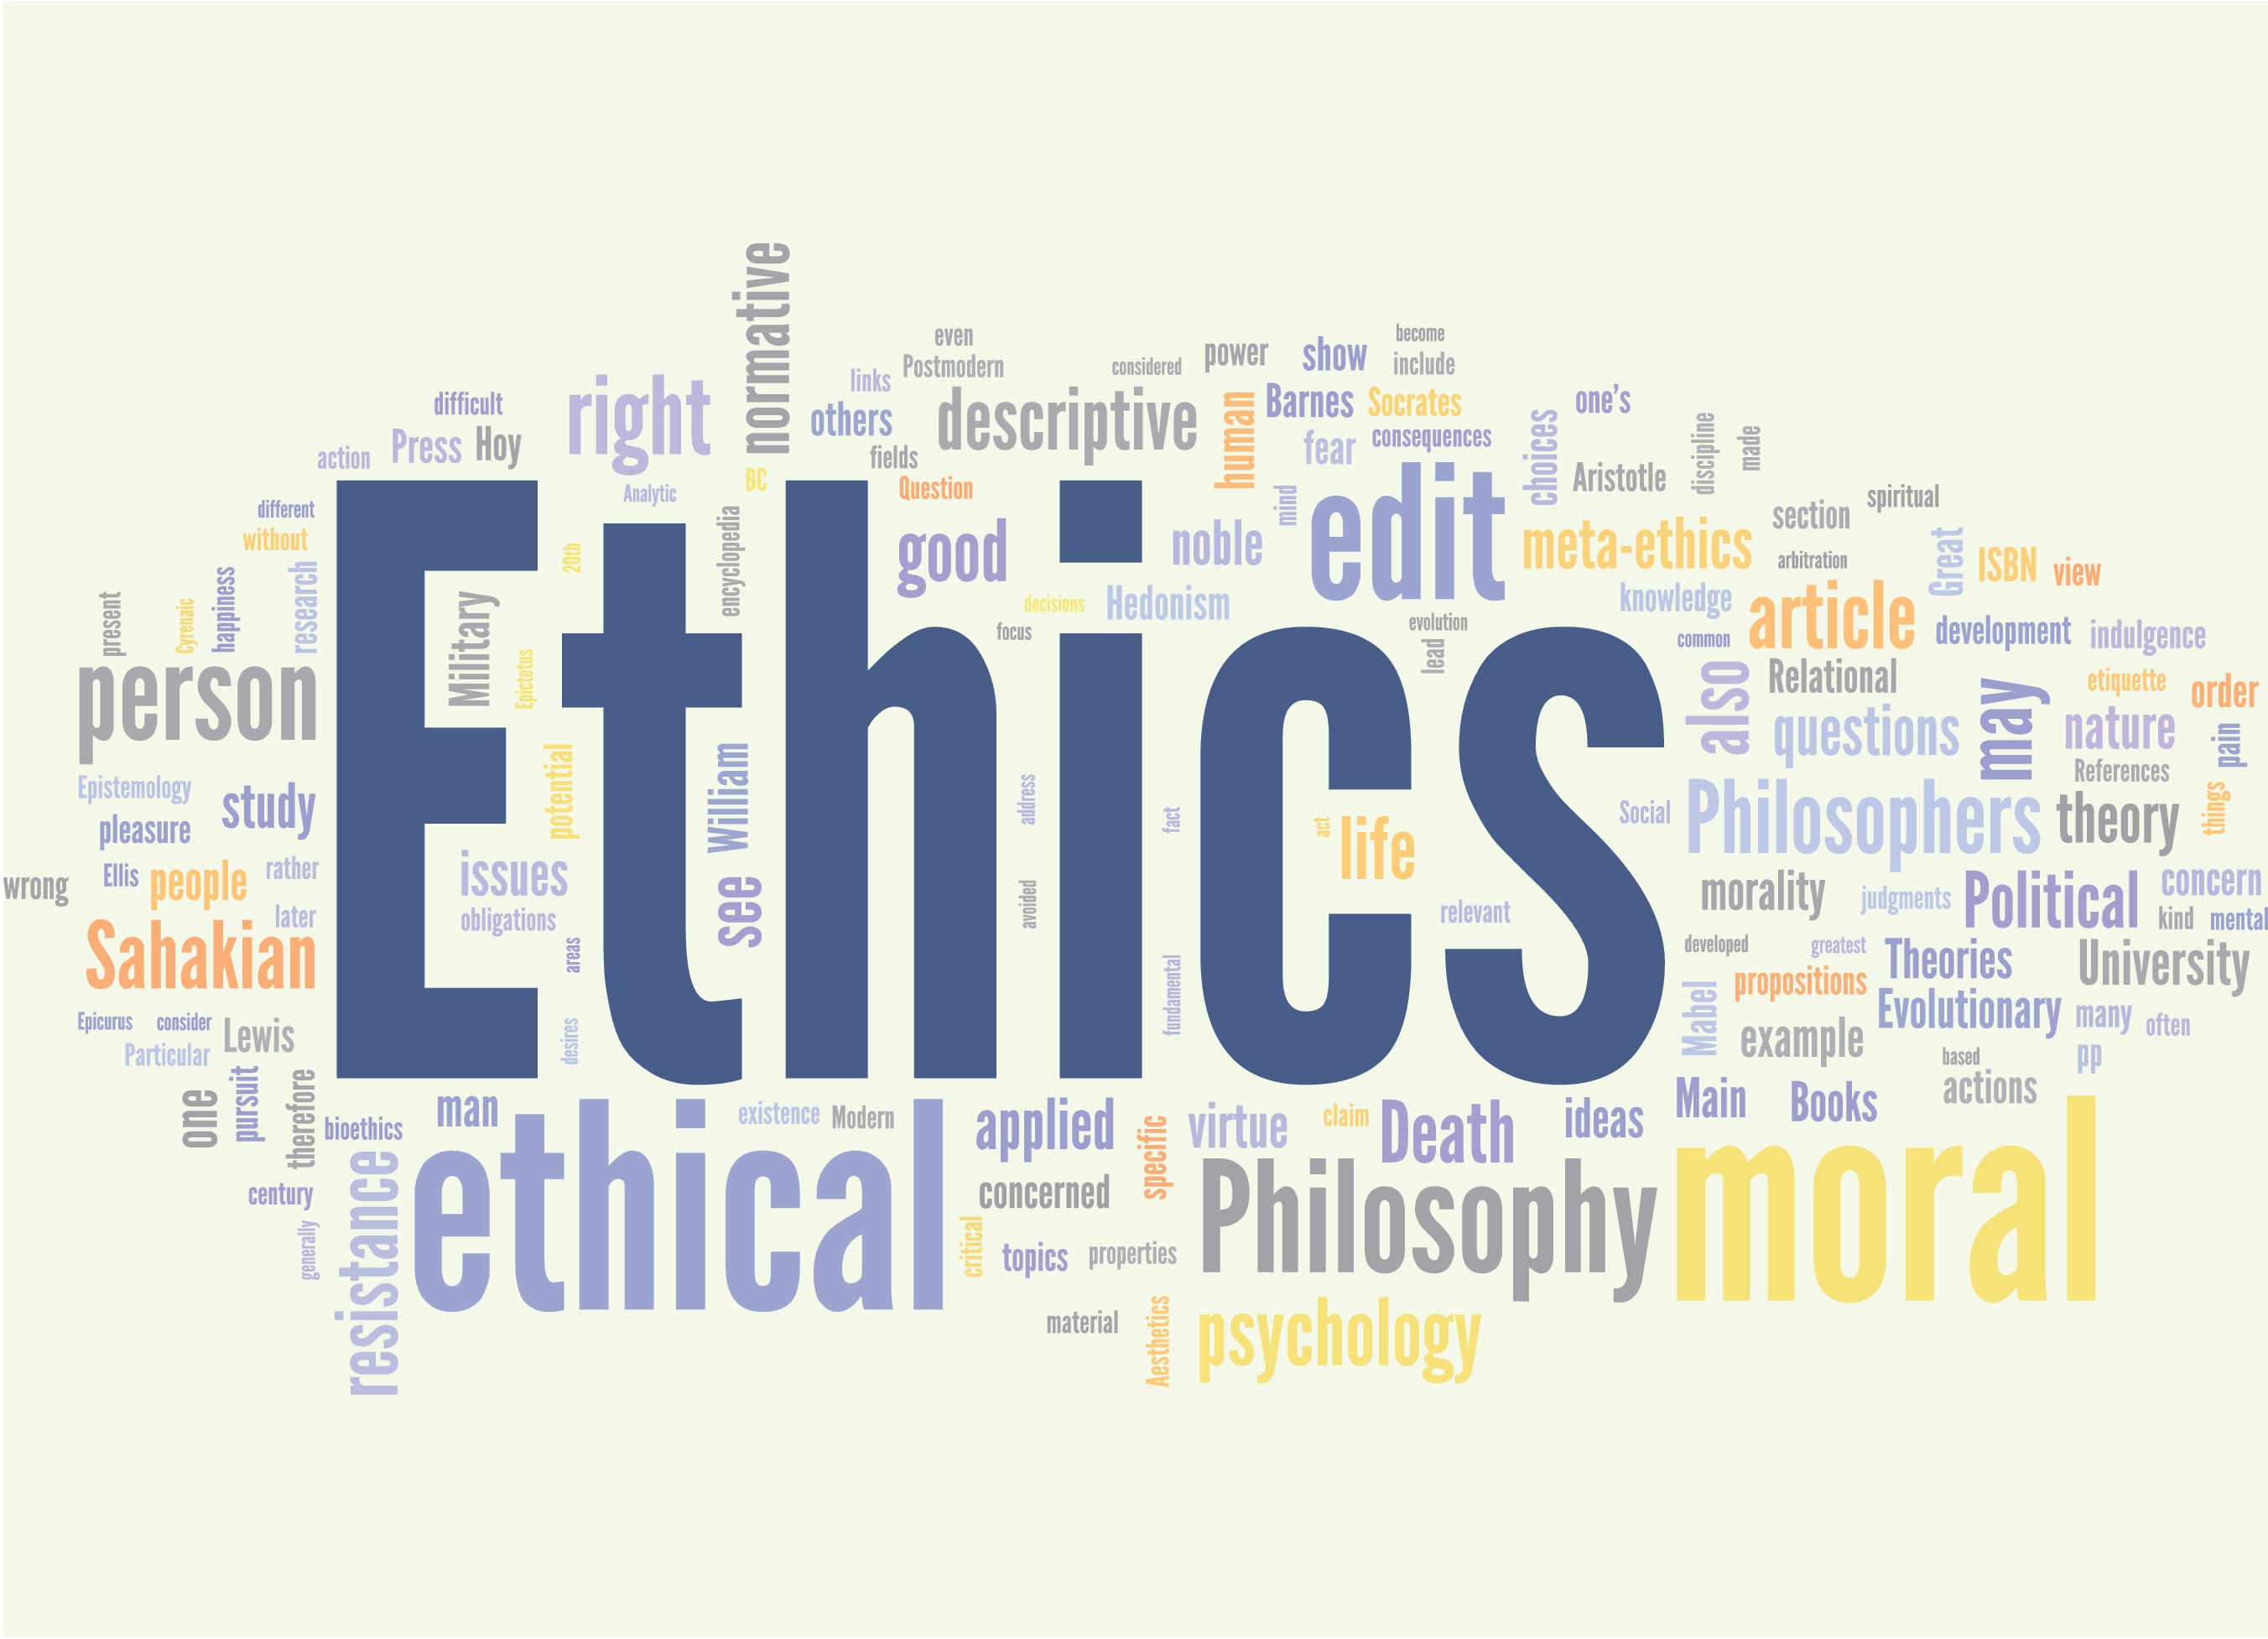 research ethics in medical education